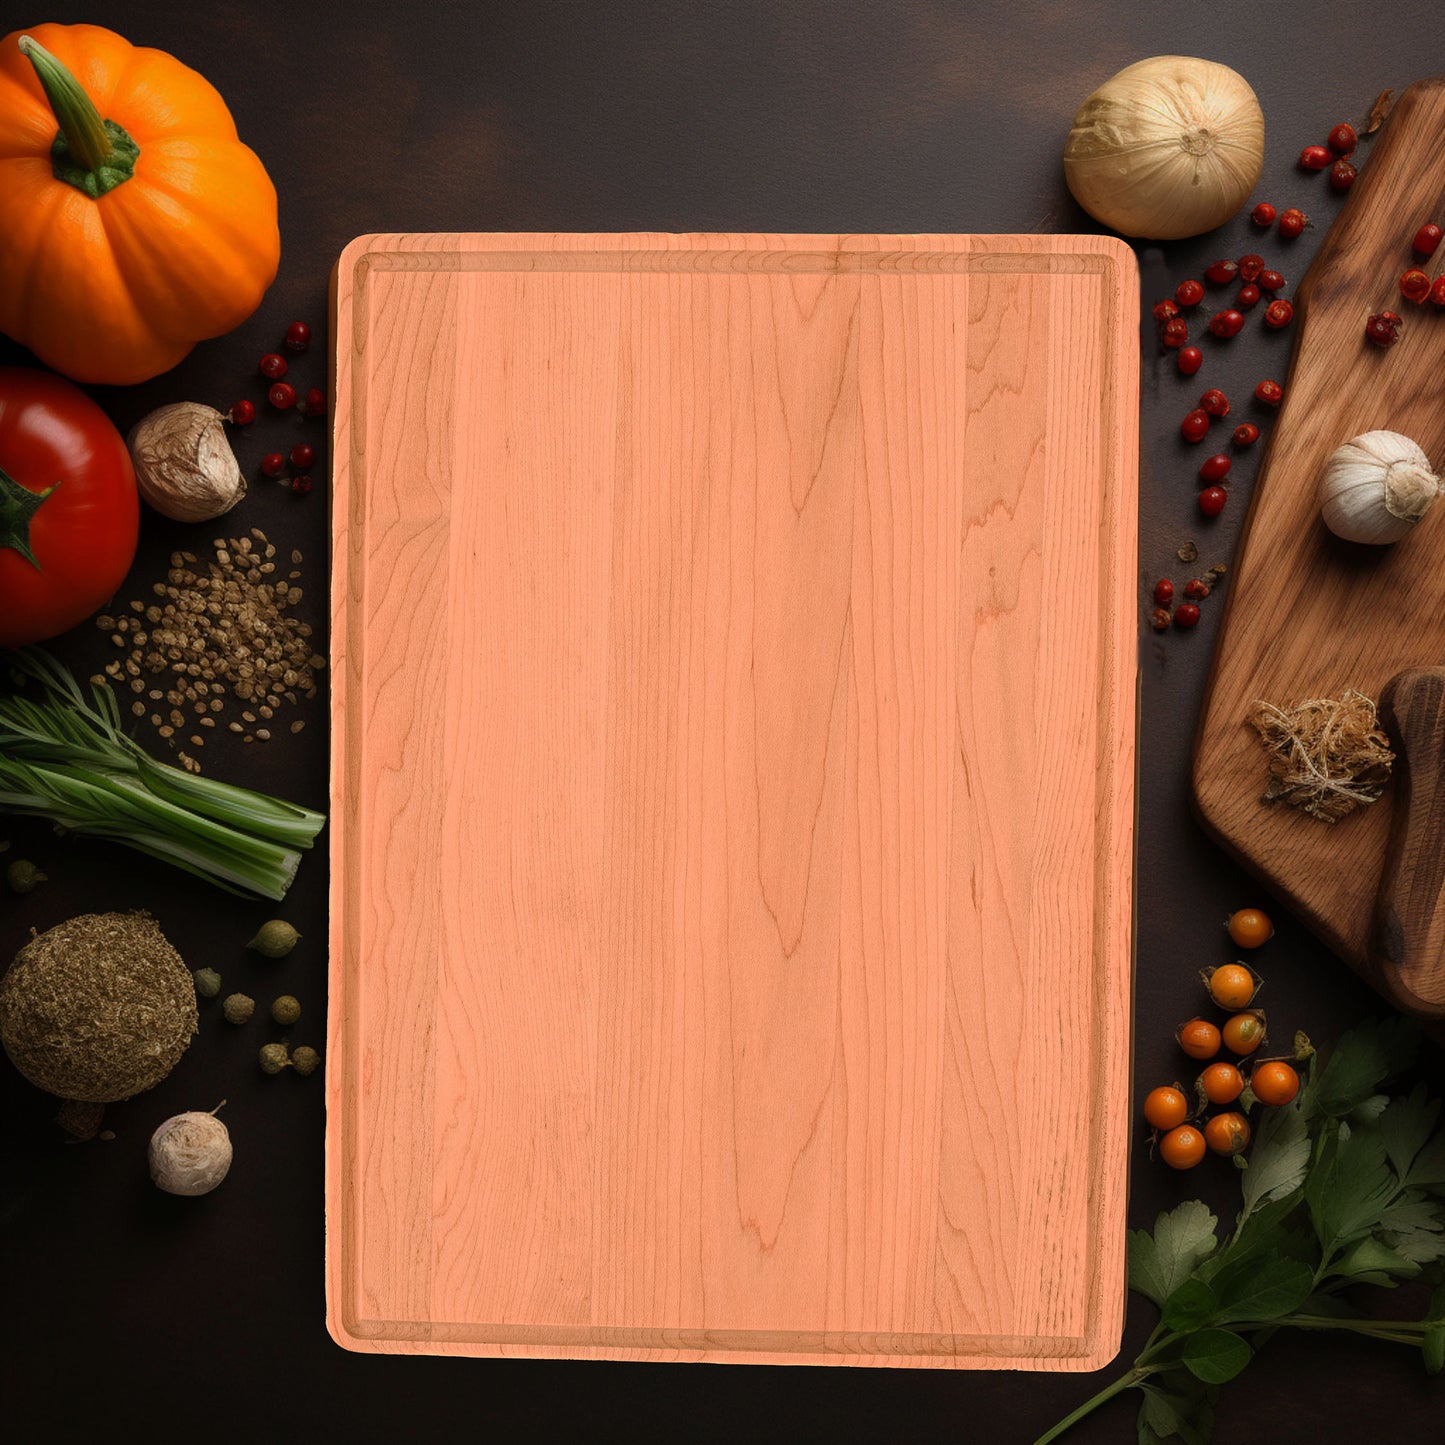 Custom Monogram Engraved Large Maple Cutting Board with Juice Groove 13-3/4" x 9-3/4